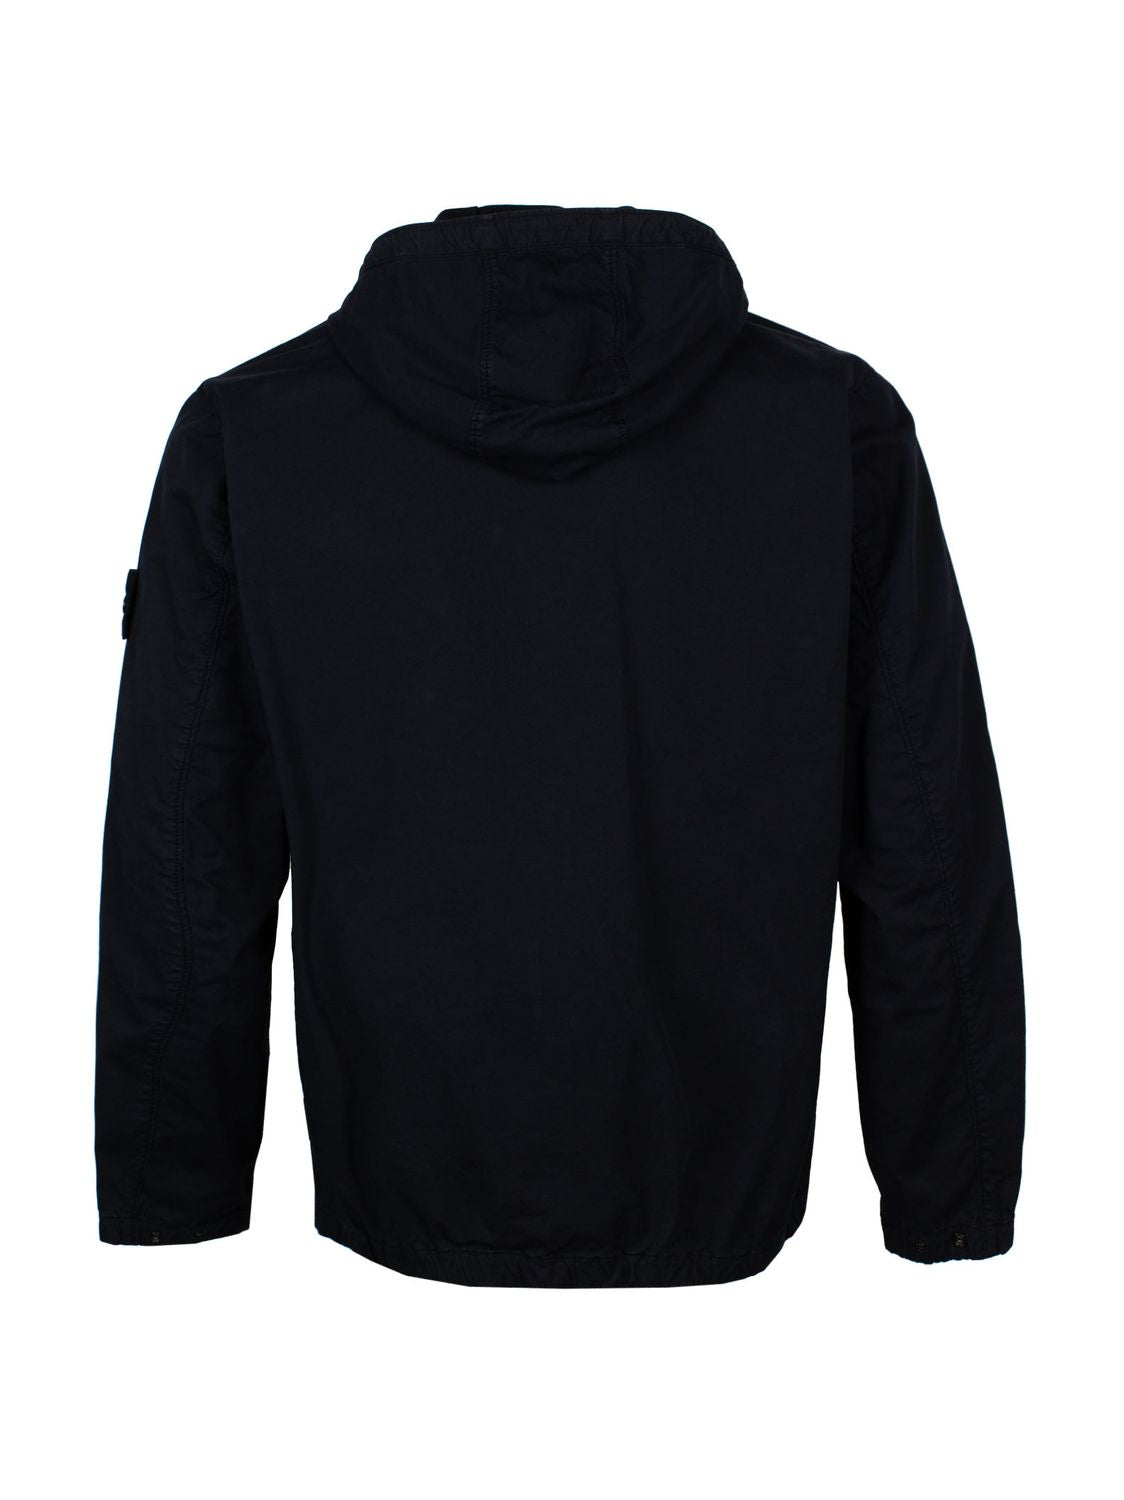 Navy Blue Stone Island Hooded Jacket for Men - SS24 Collection